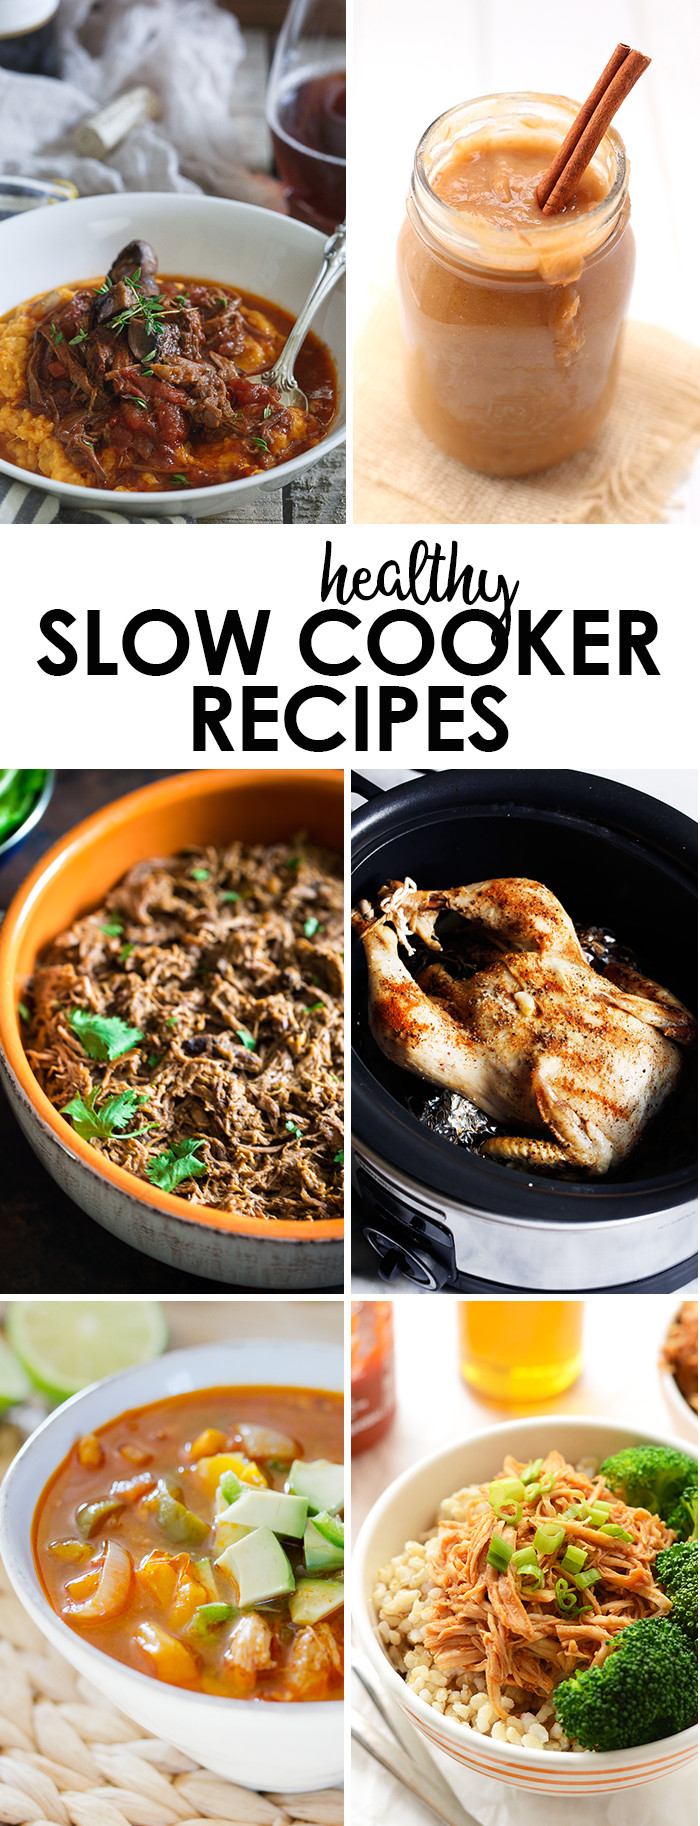 Healthy Slow Cooker Dinners
 5 Ingre nt Honey Sriracha Slow Cooker Chicken Fit